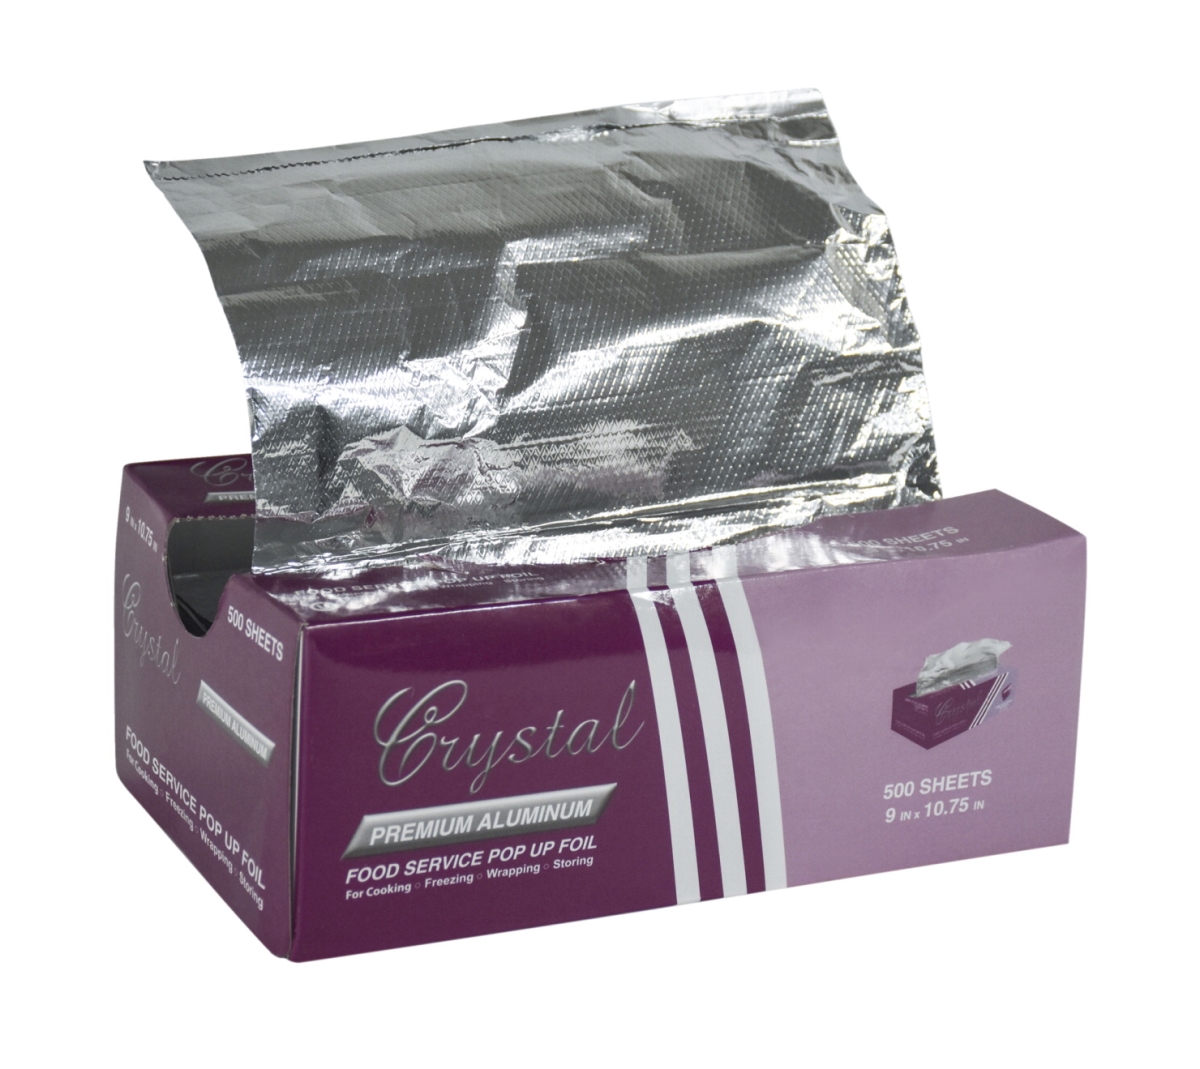 2003424 9 X 10.75 In. Pop Up Foil Interfold Sheets - Case Of 6 - 500 Per Box